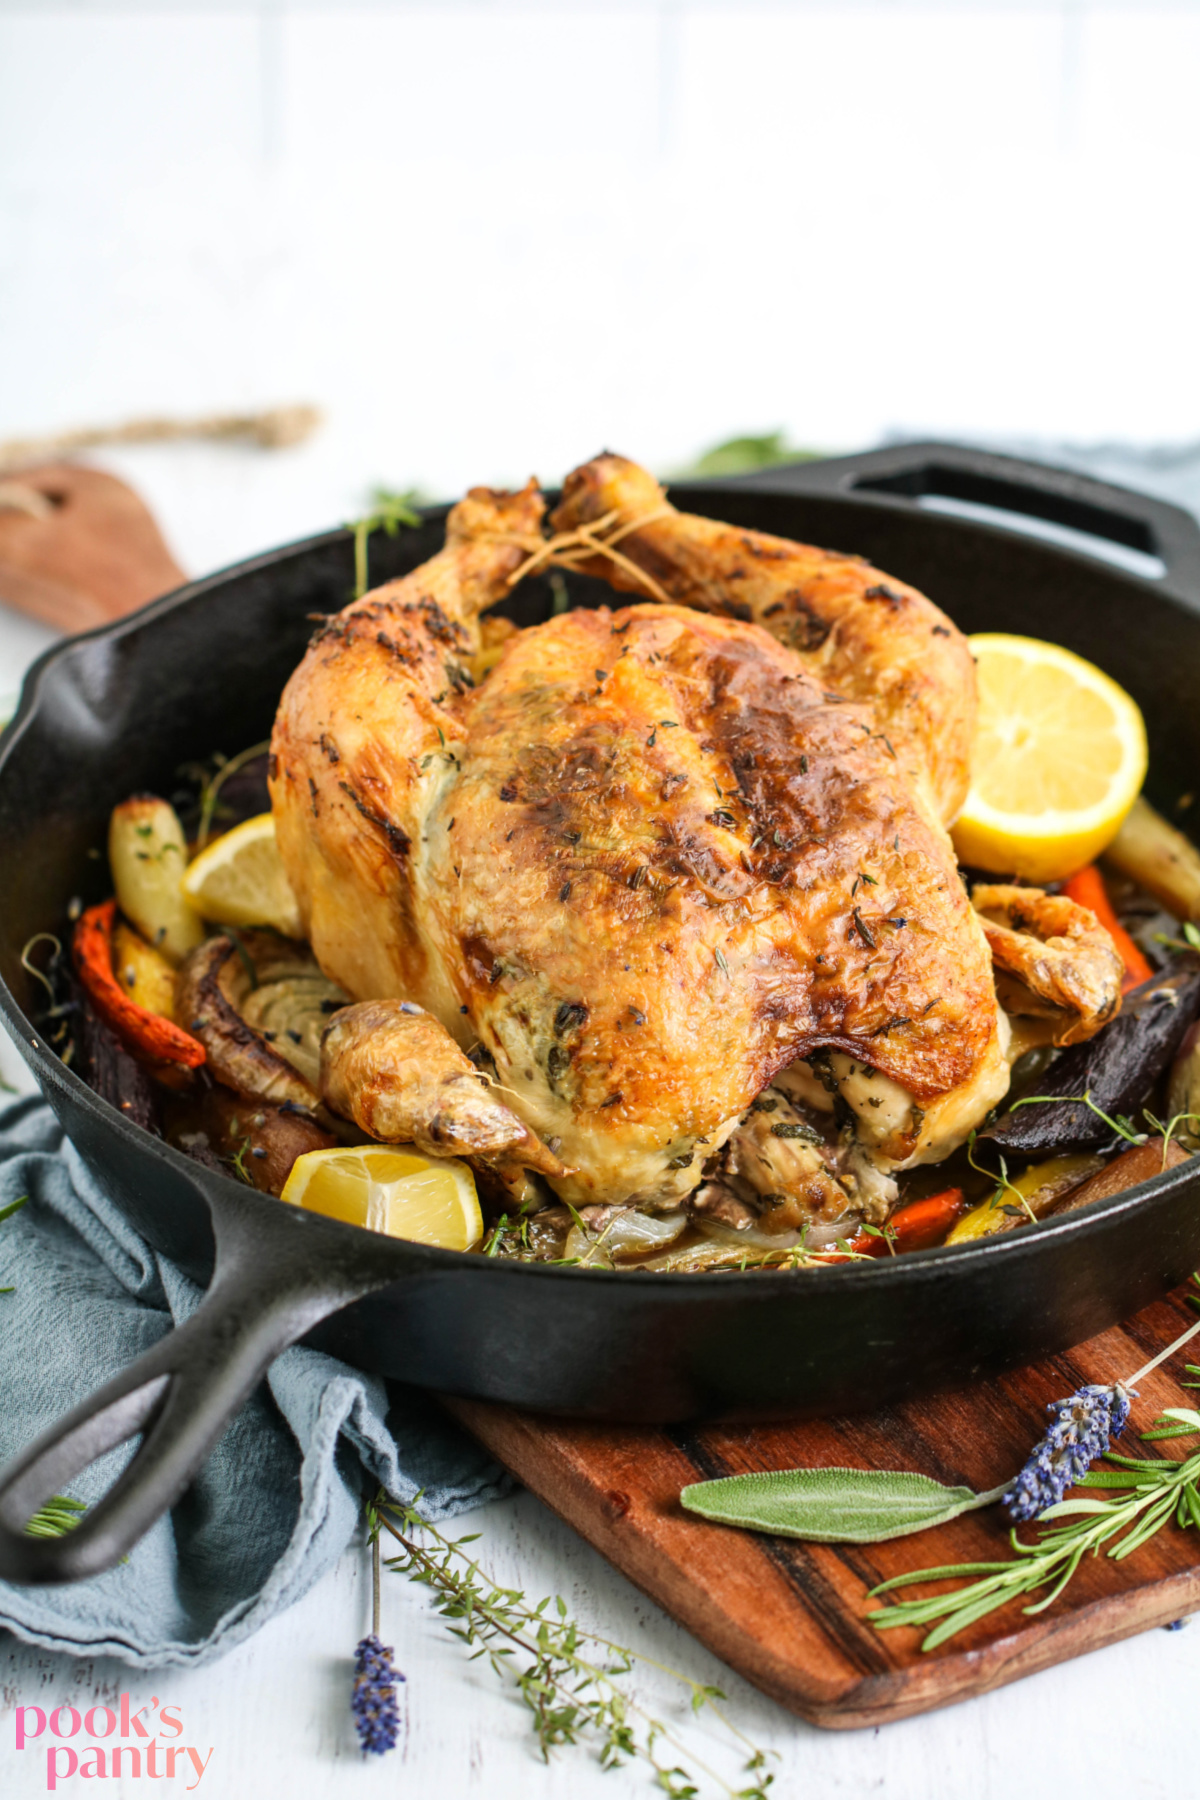 Roast chicken with French herbs.